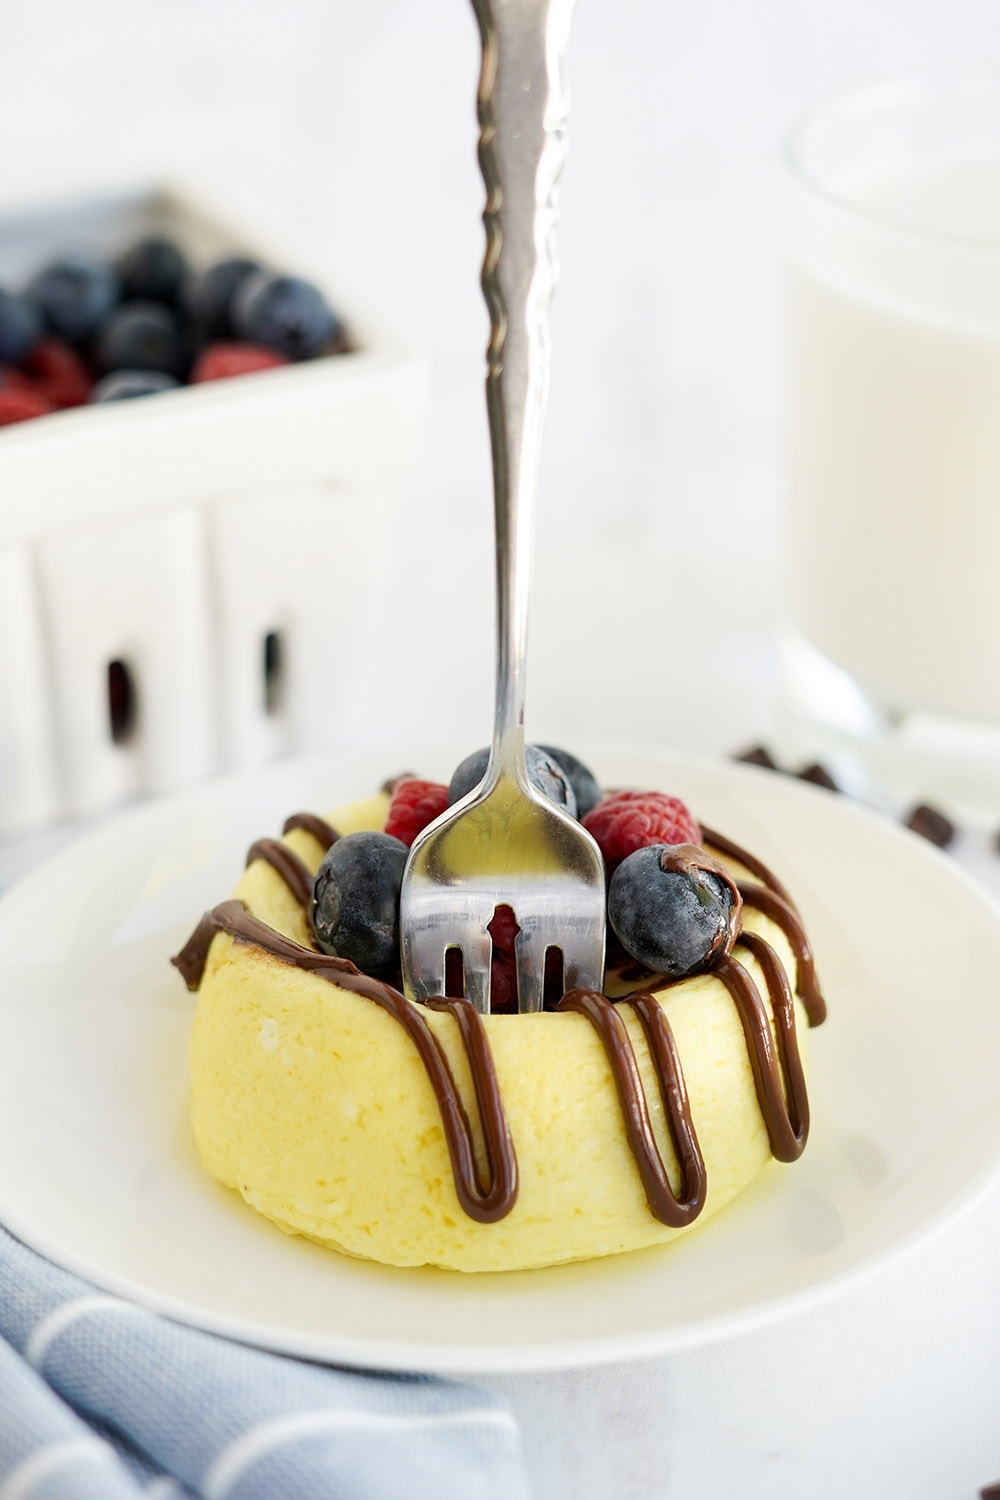 Fork standing in a cheesecake with chocolate and berries. Basket of blueberries in the background.